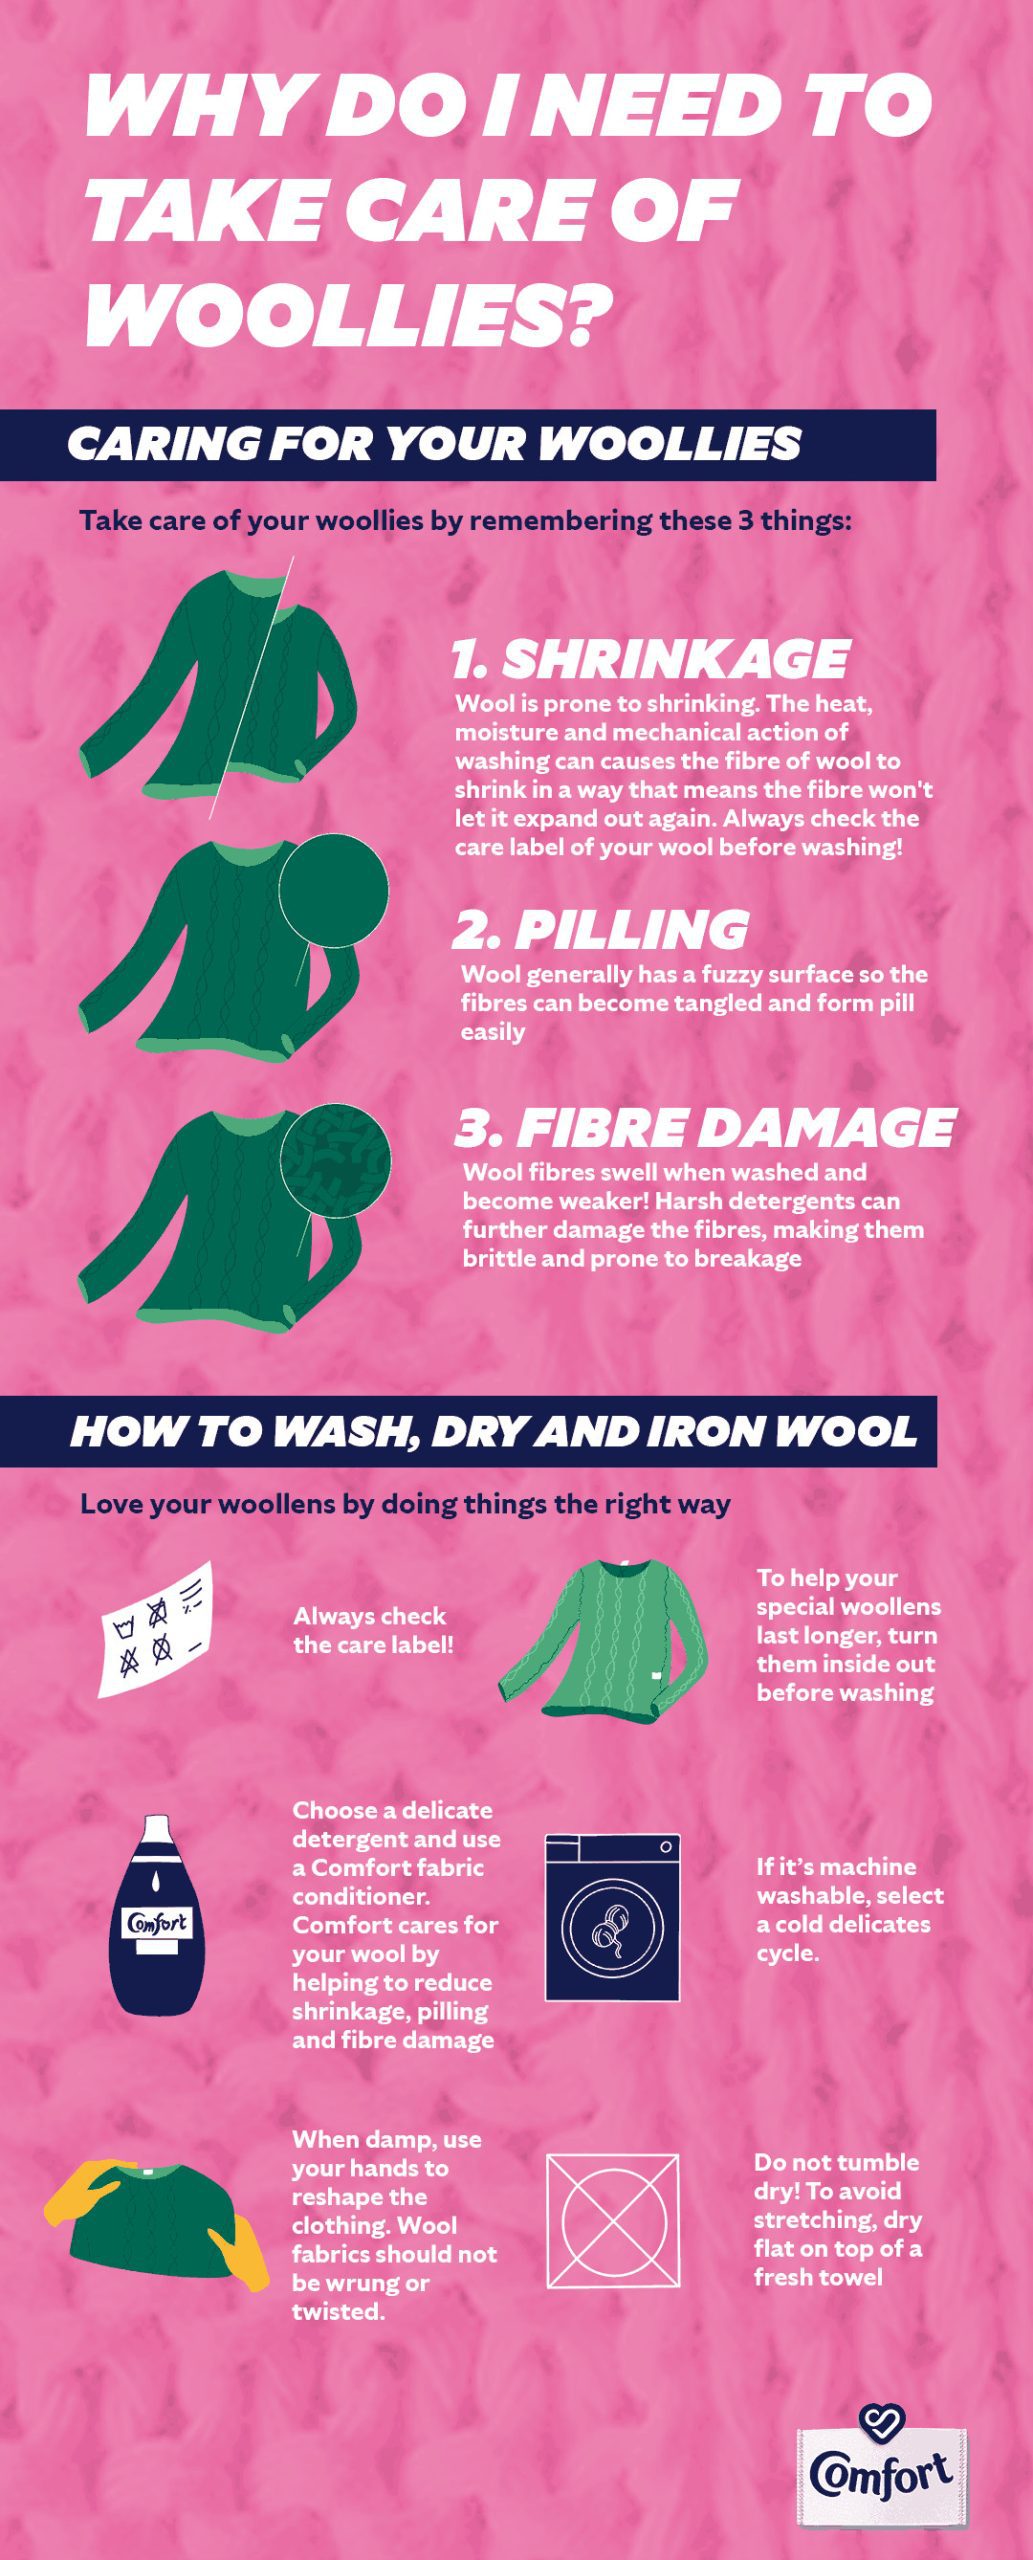 How to care for different types of wool